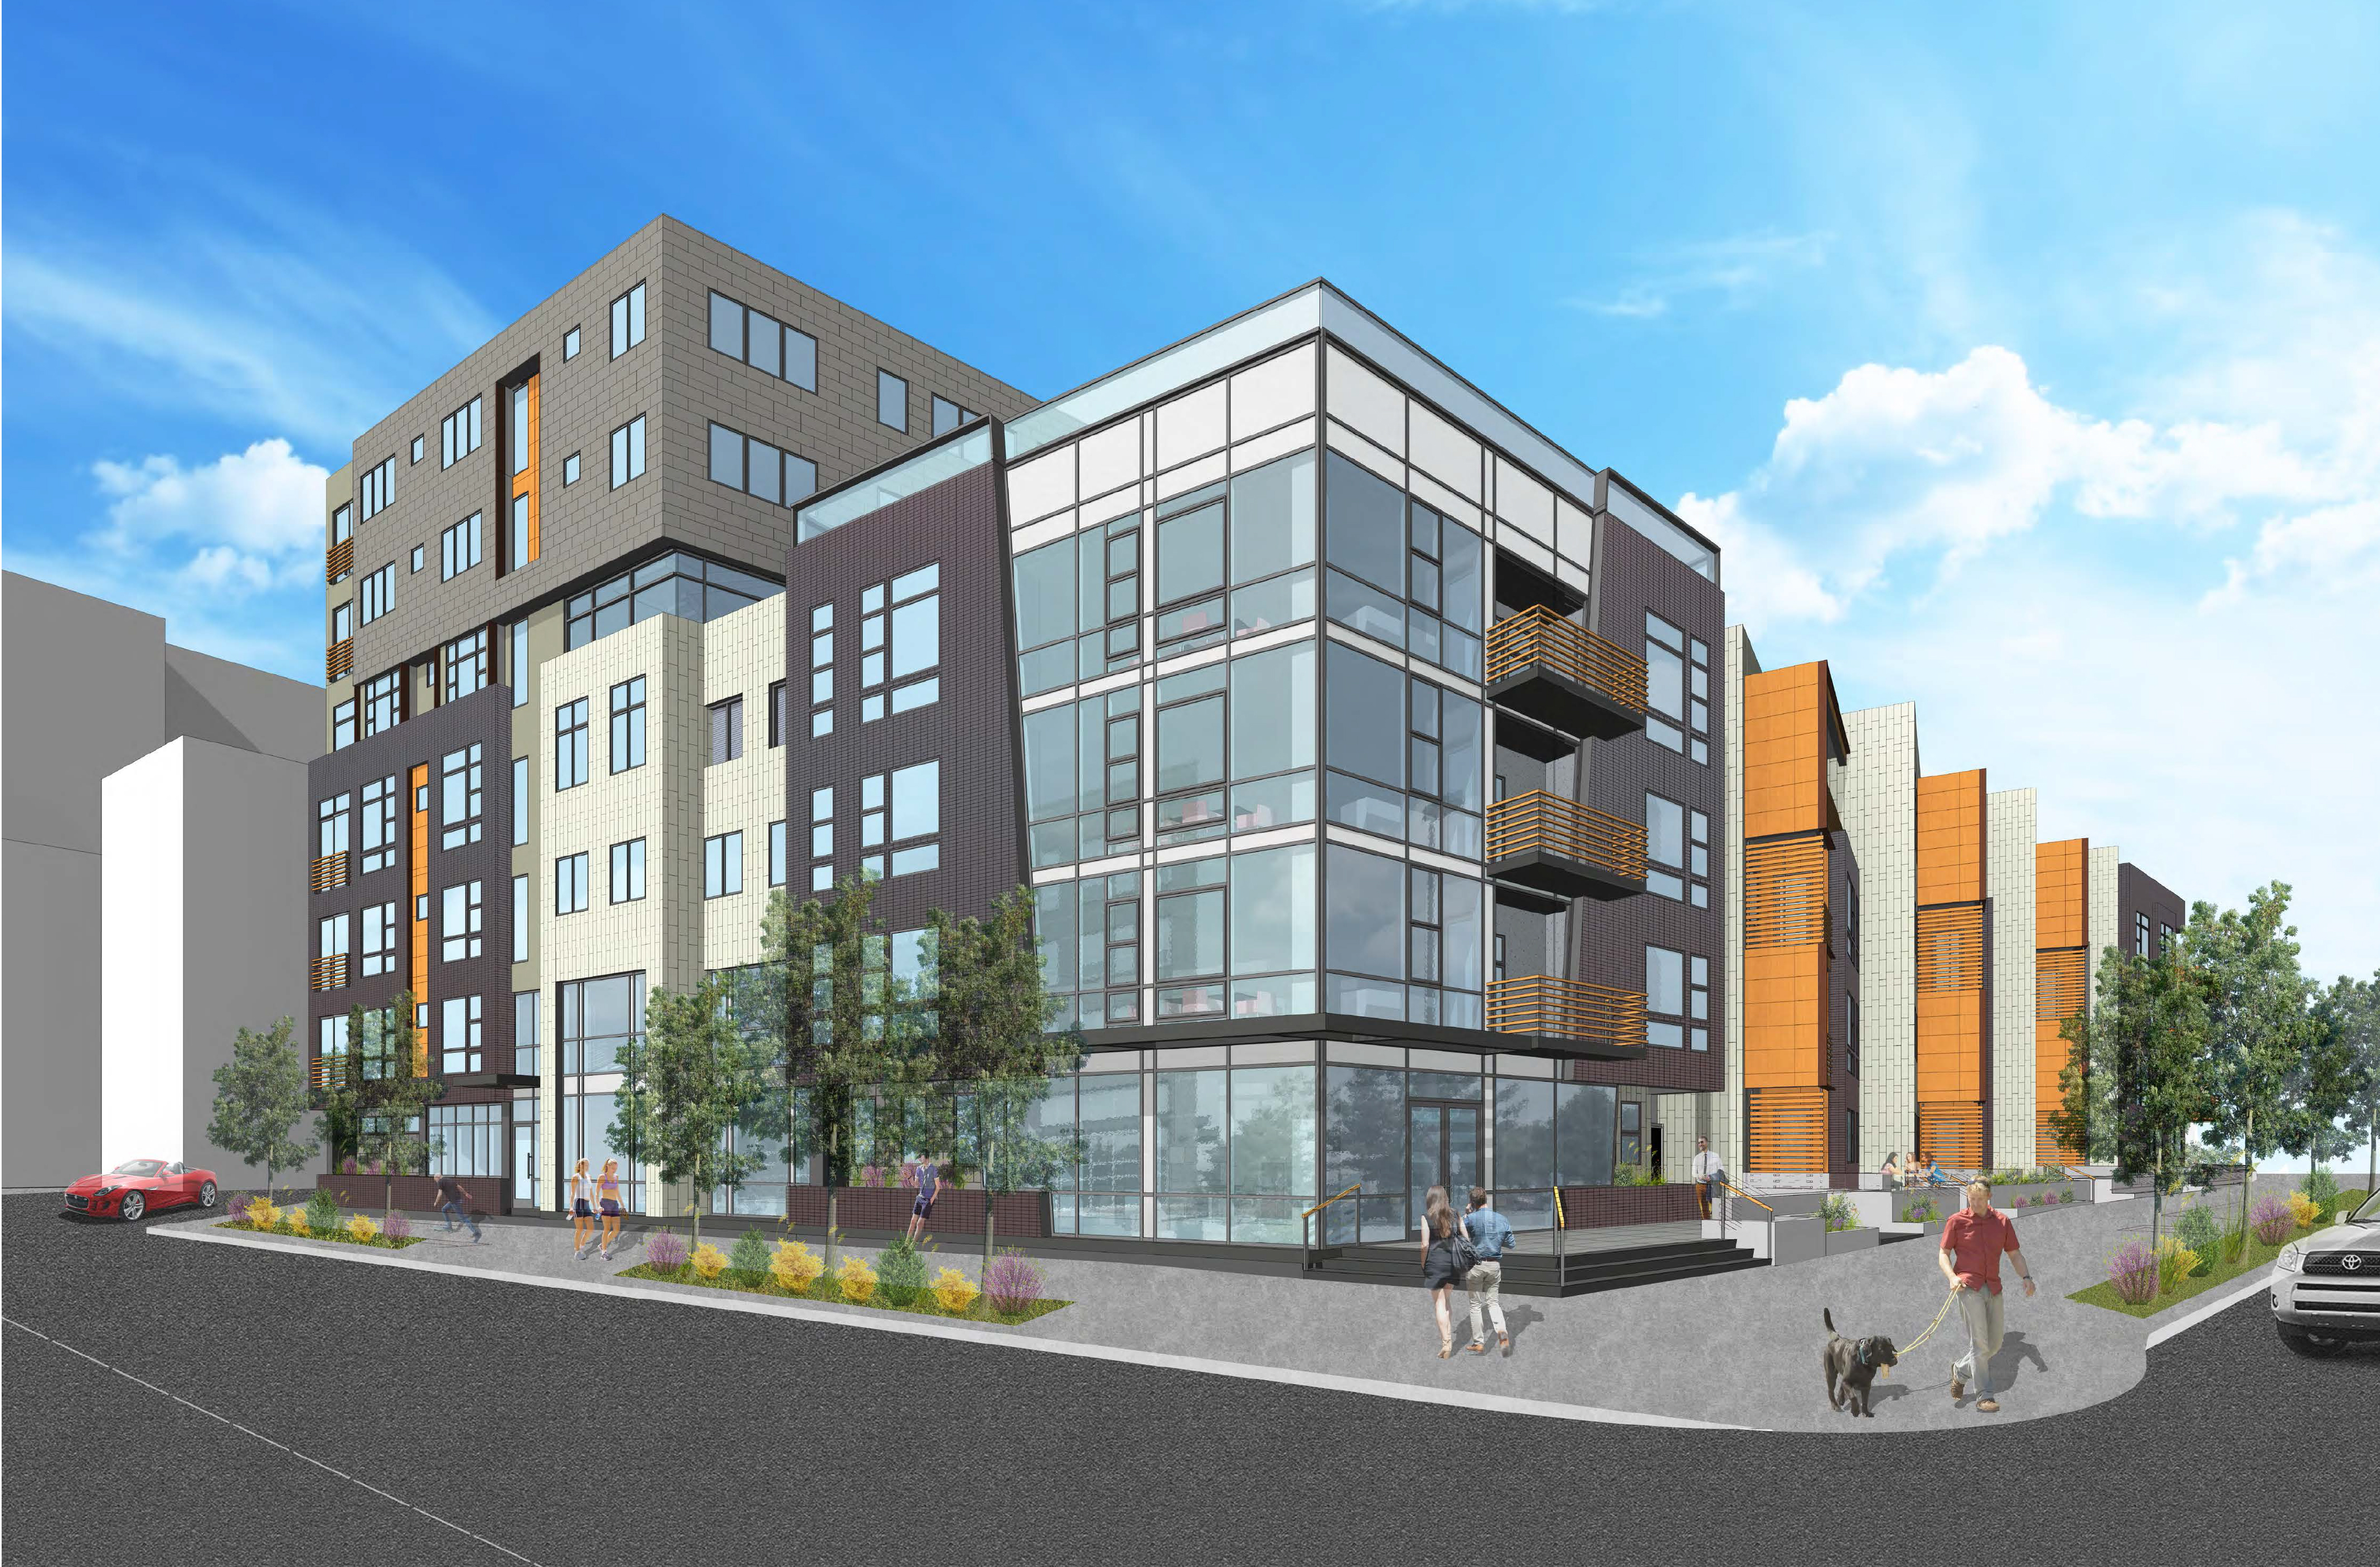 A new development is underway on Little Raven Street in Union Station. Renderings courtesy of Holland Partner Group.